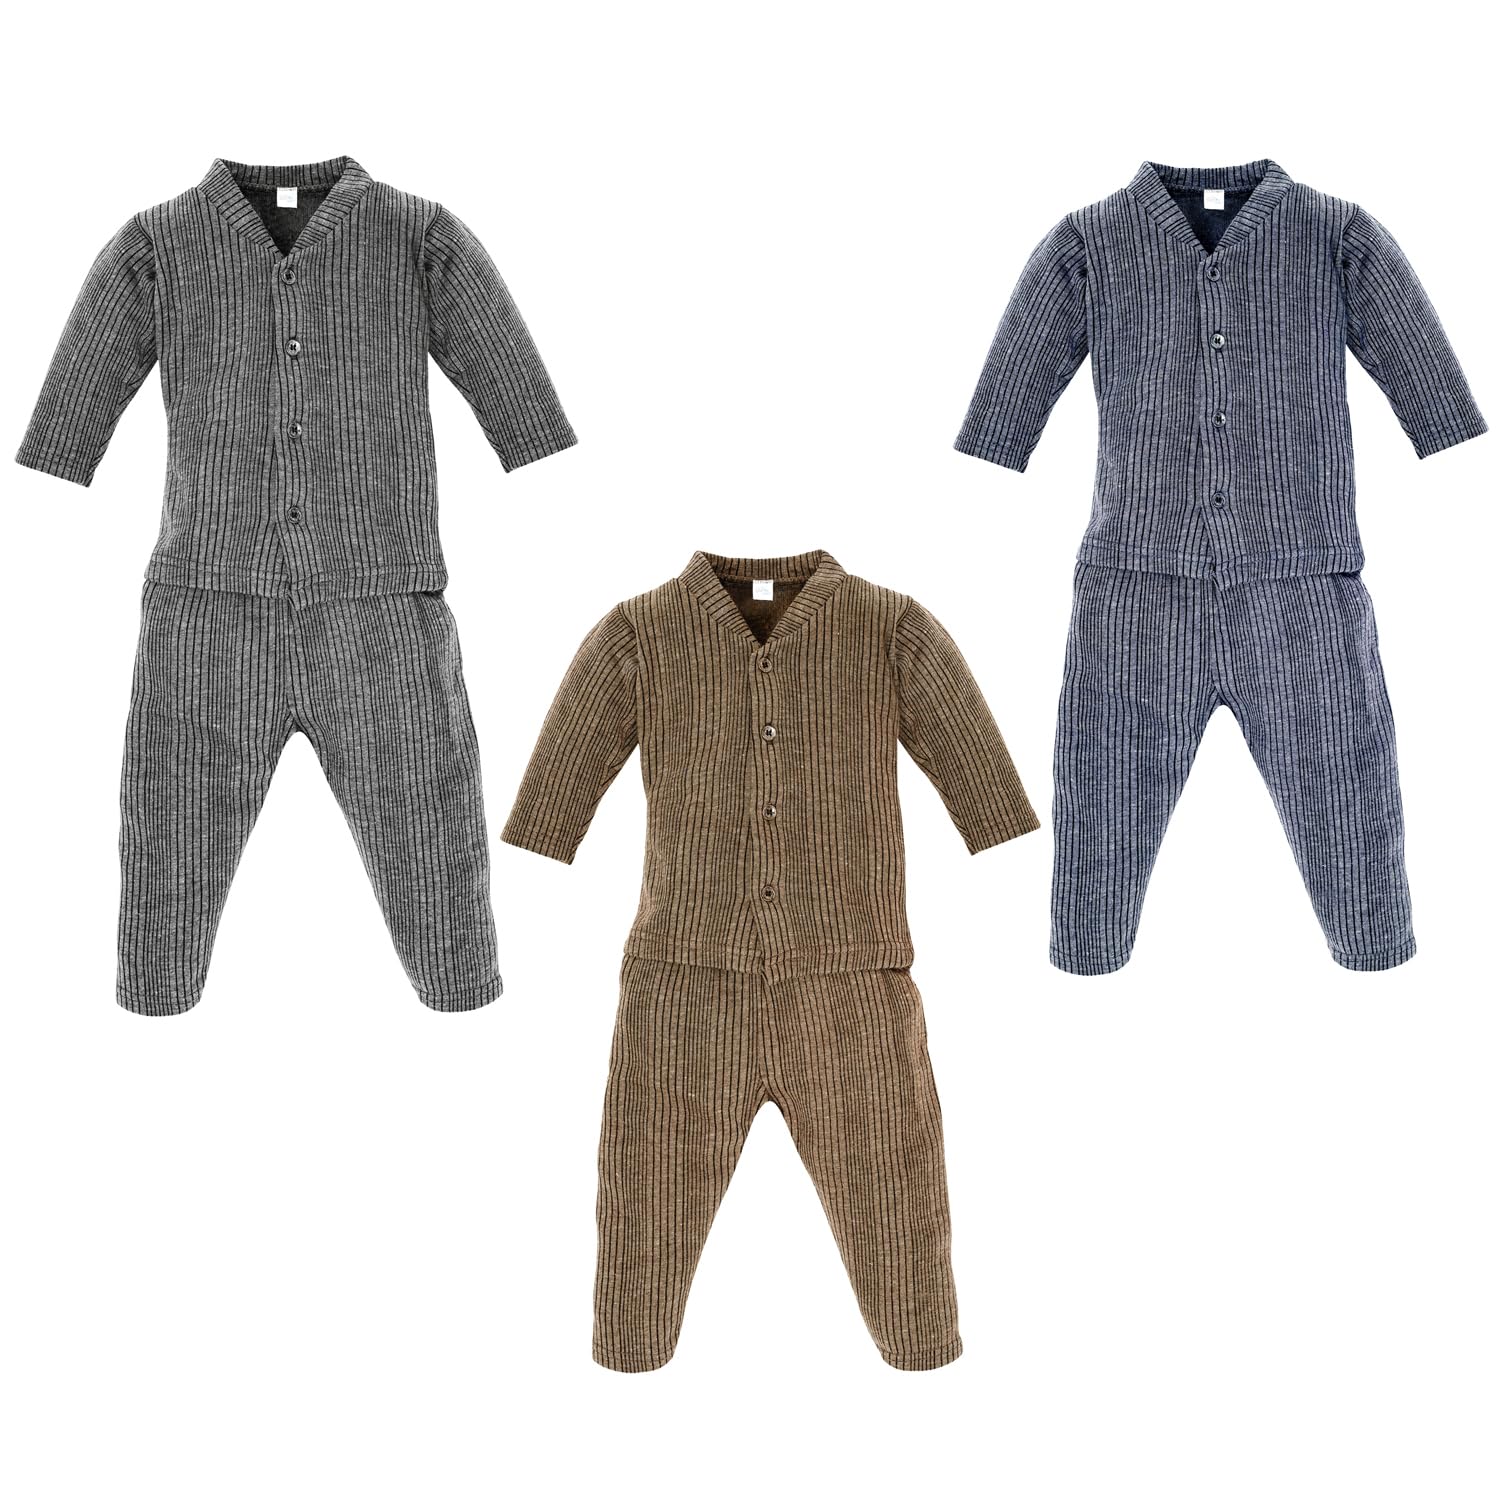 Baby Thermal Suit Top & Pajama Set for Baby Boys & Baby Girls